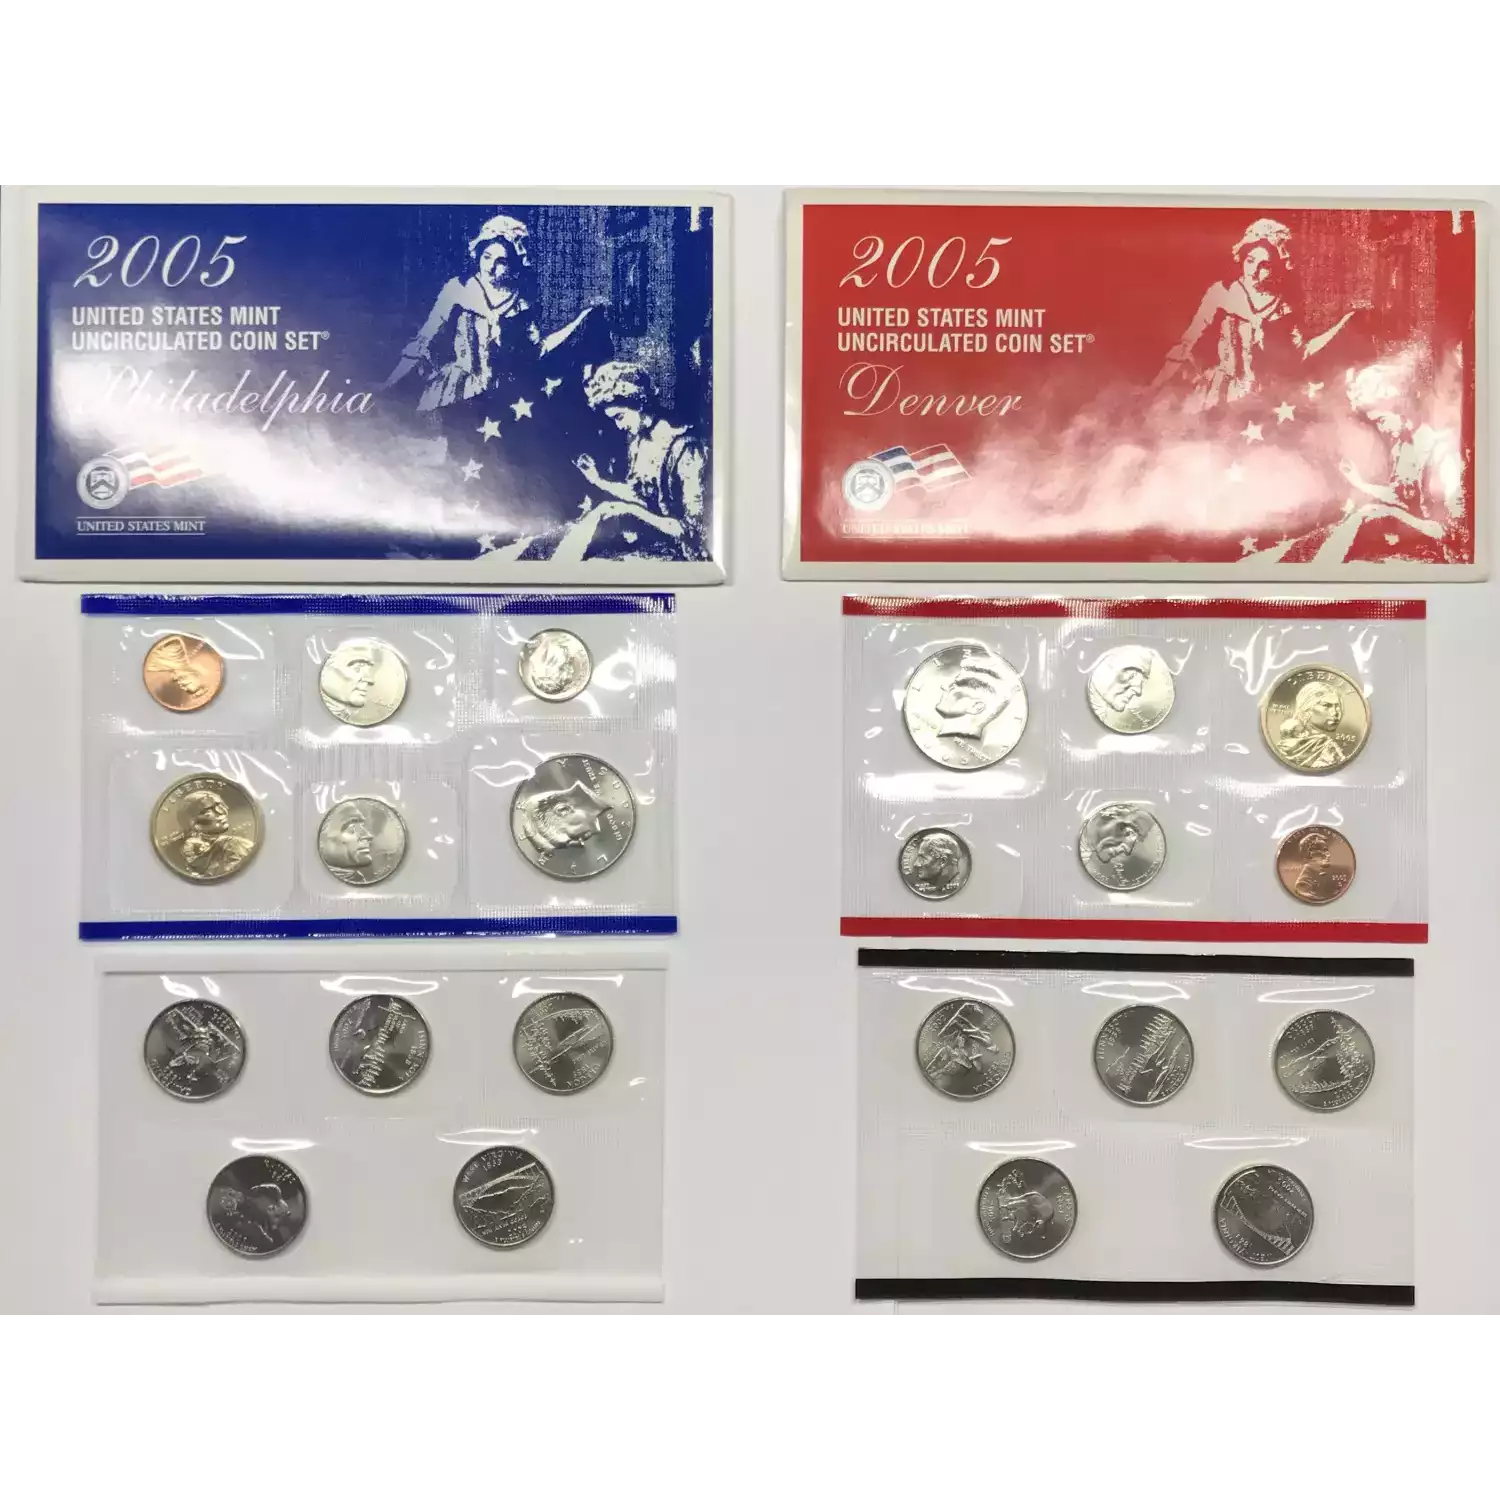 2005 US Mint Uncirculated Coin Set - P & D - SMS Satin Finish